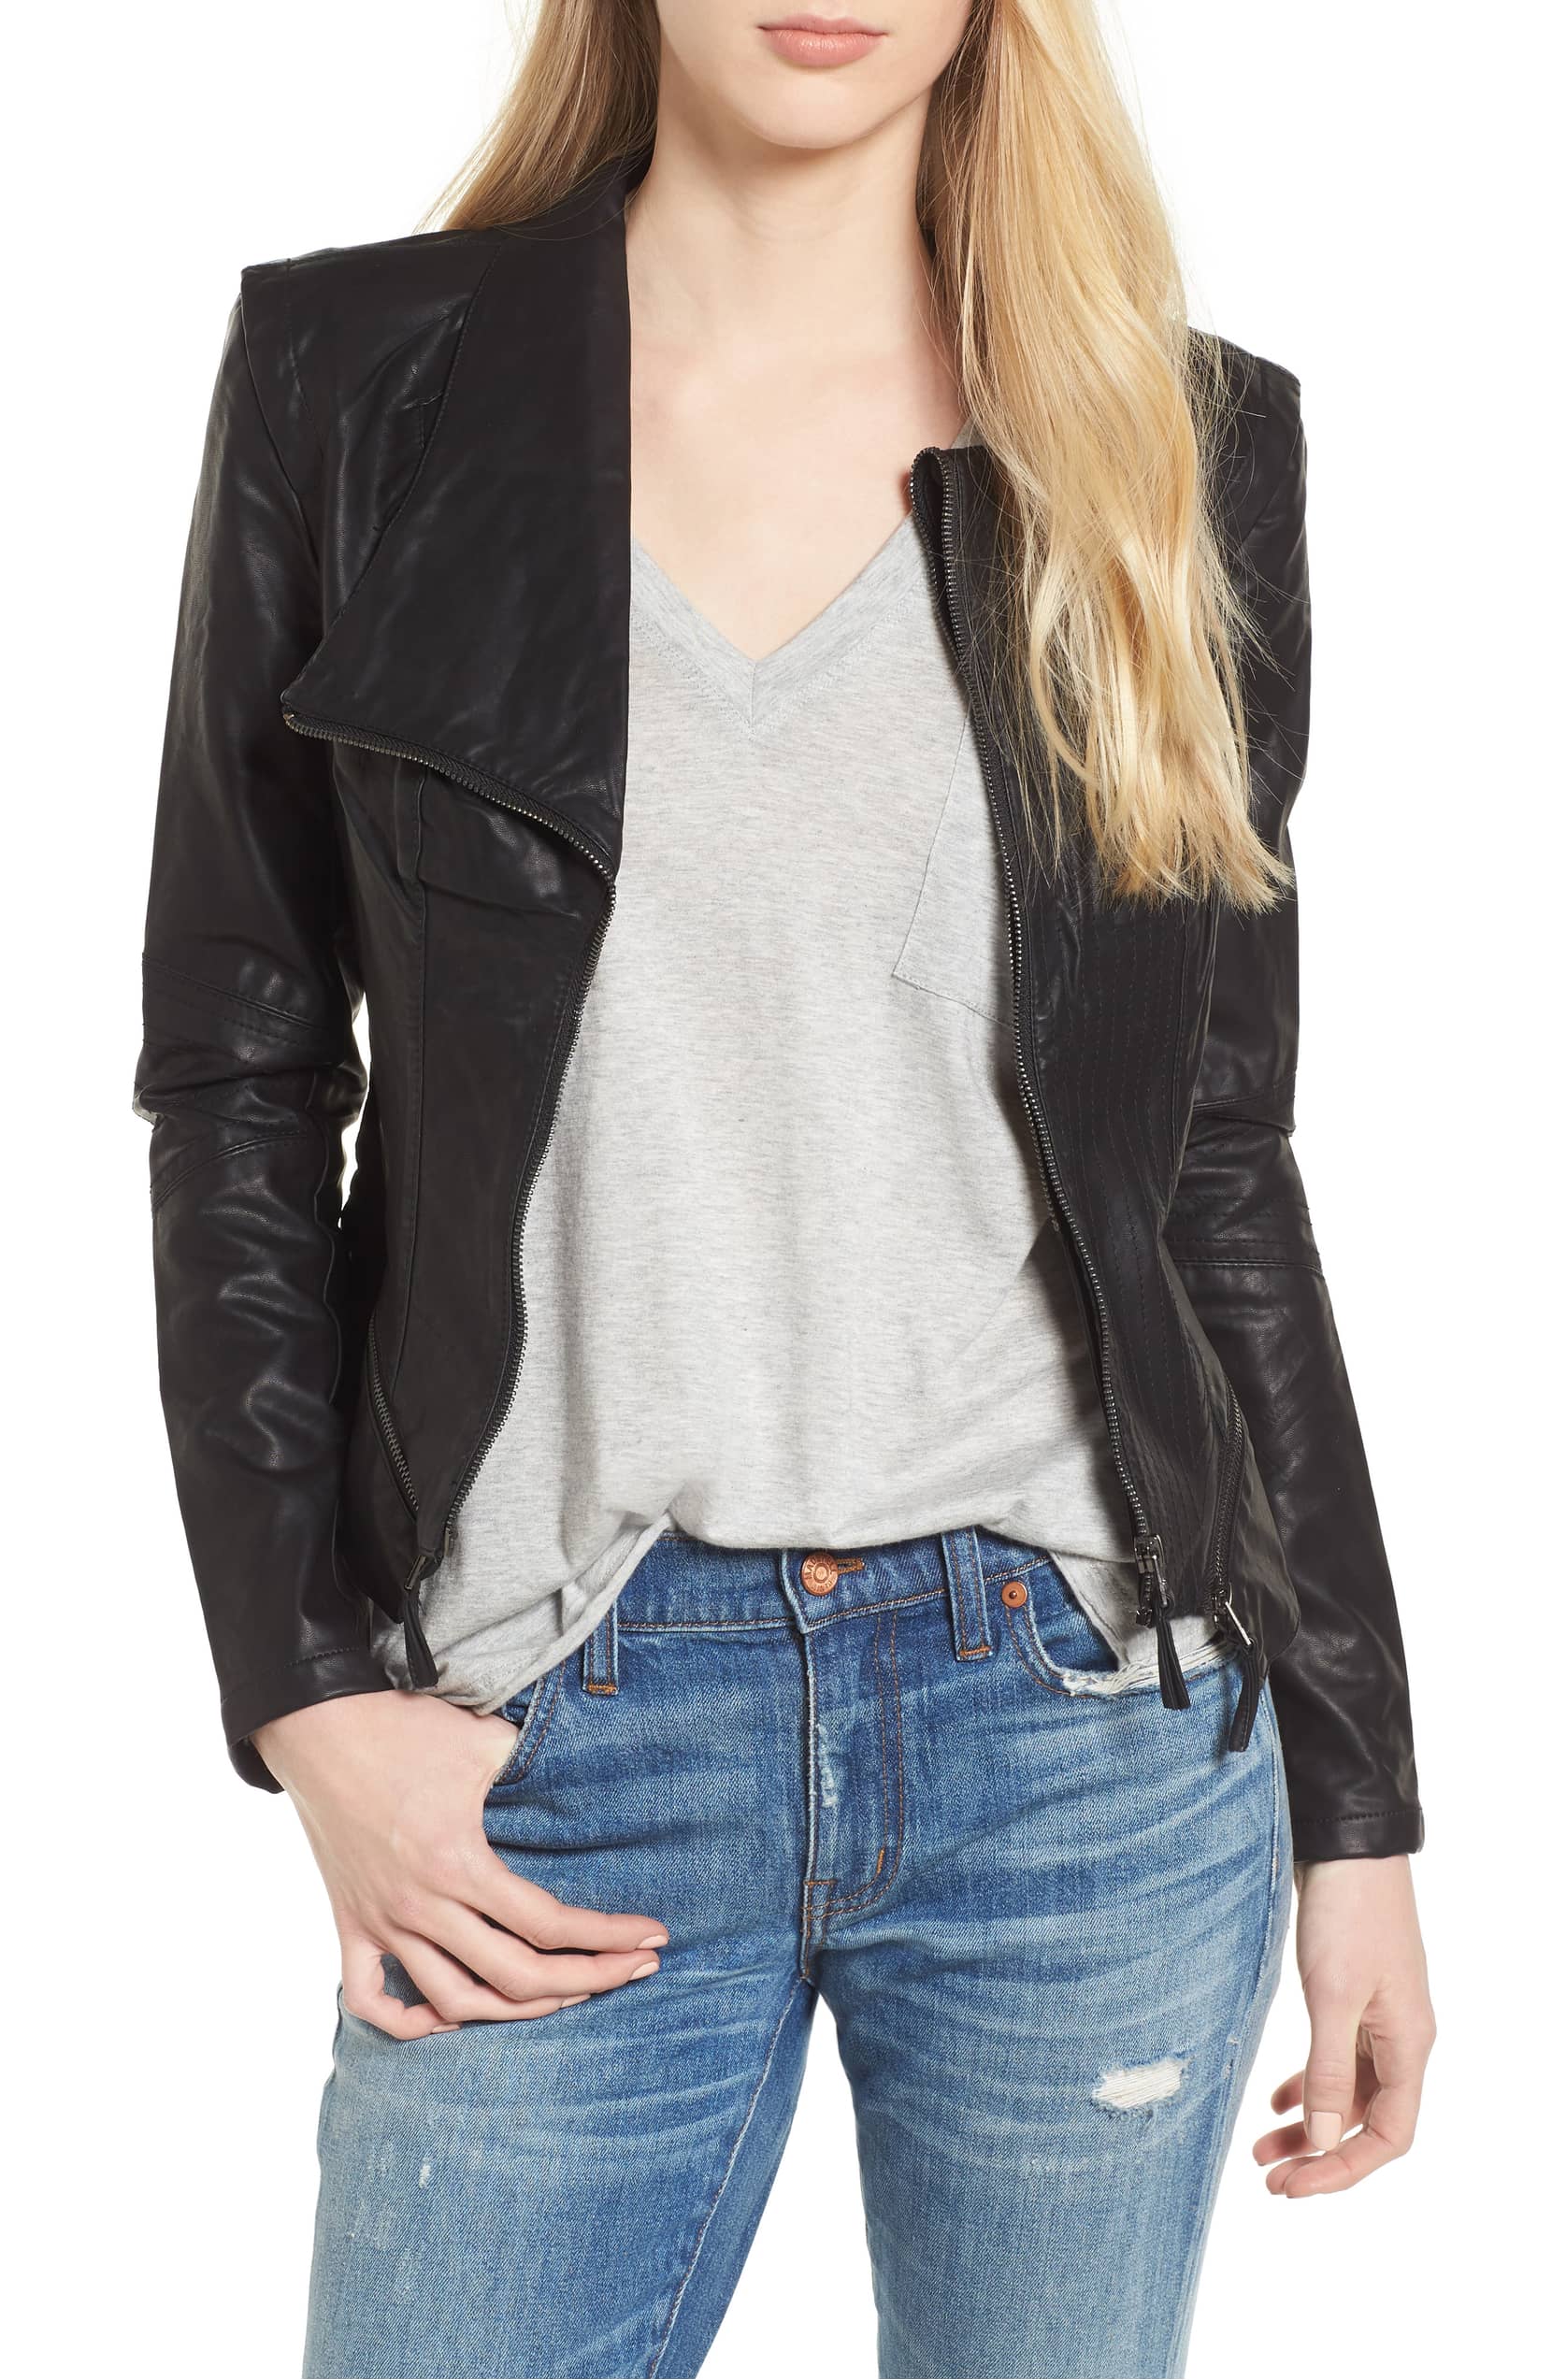 This Biker Chic Faux Leather Jacket Is Under $100 at Nordstrom